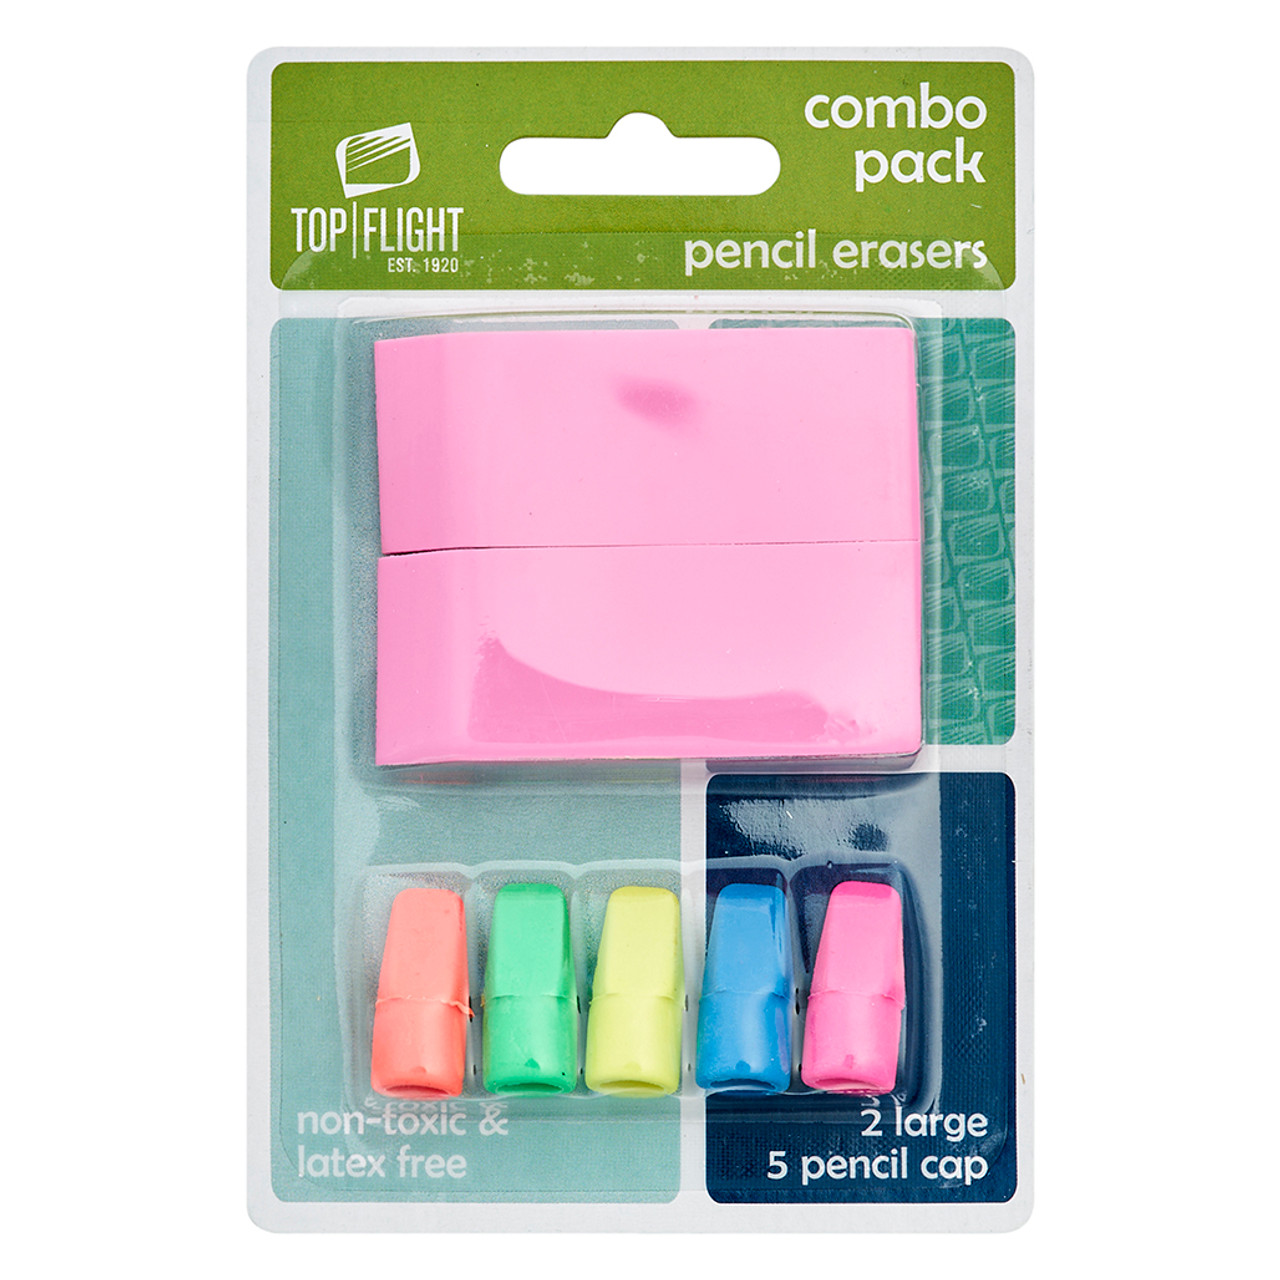 Top Flight Pencil Eraser Combo Pack, 7 pc - Fry's Food Stores